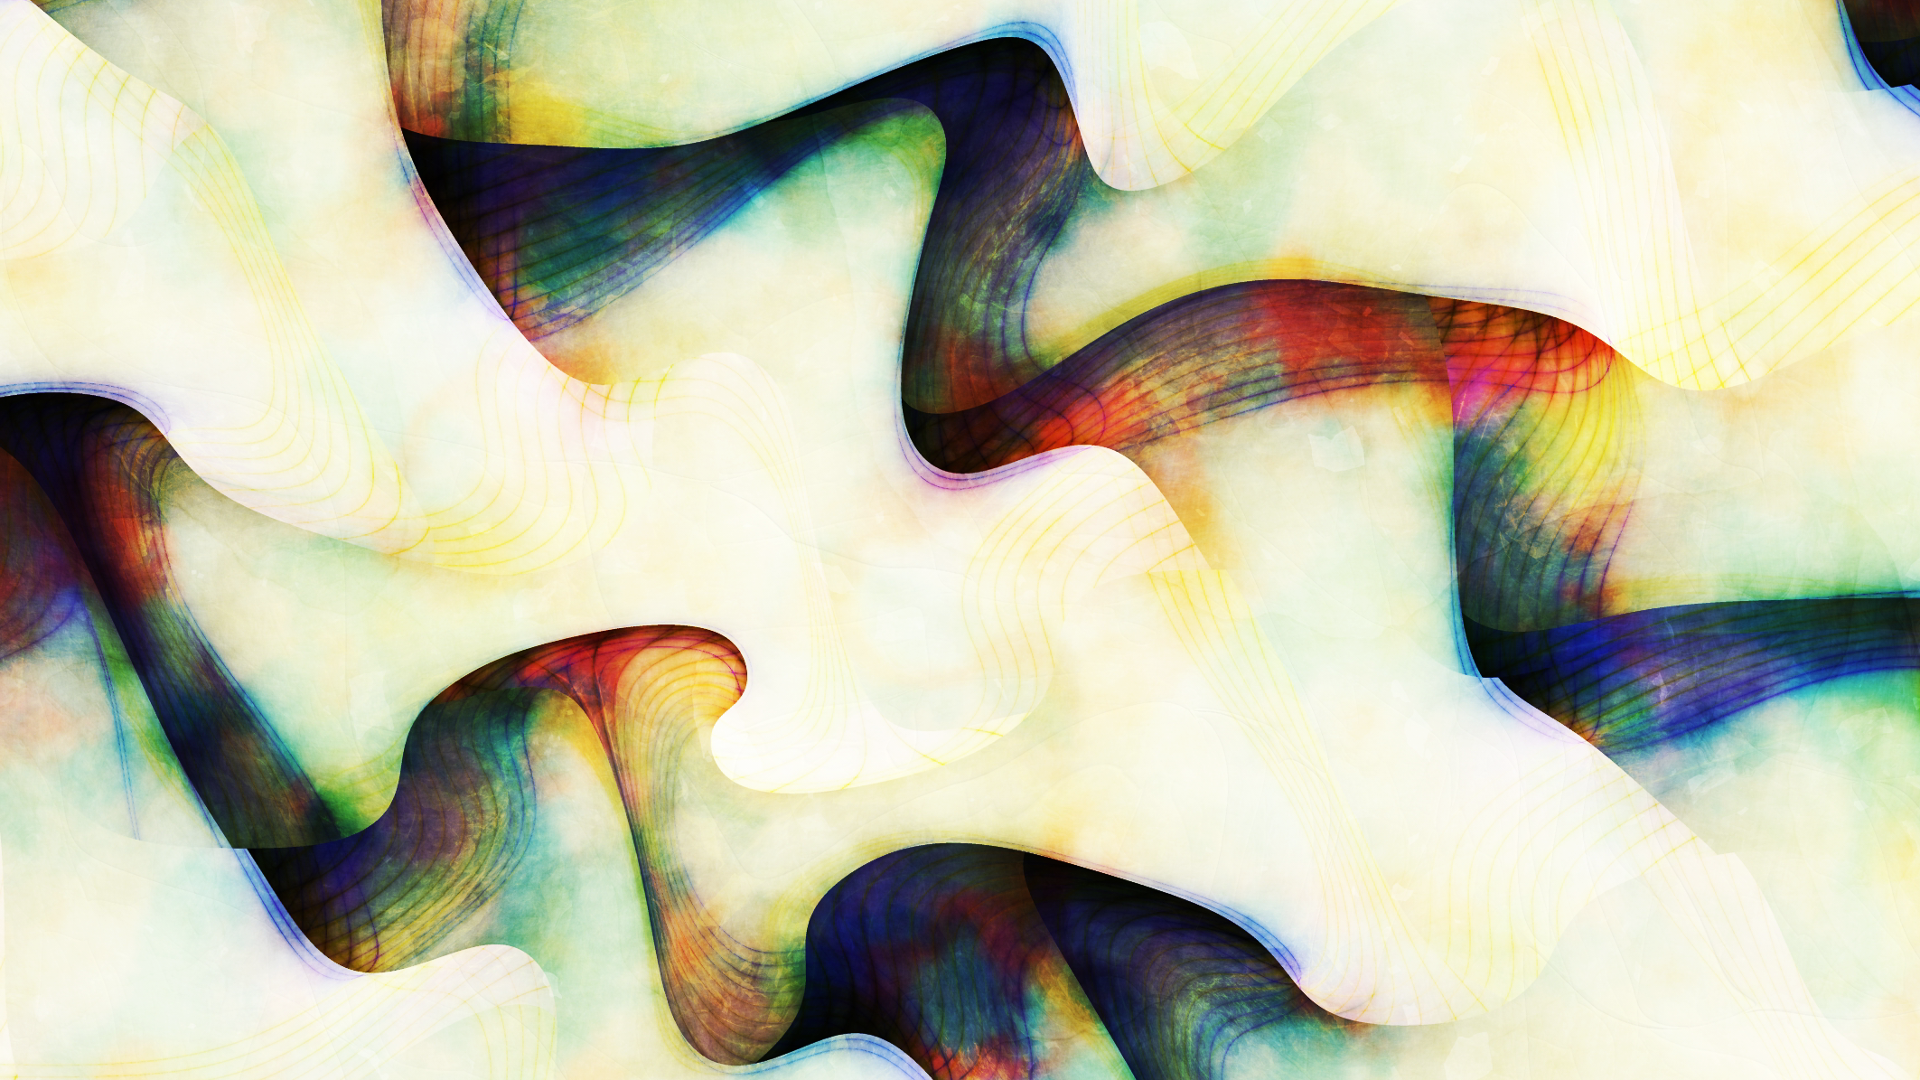 General 1920x1080 digital art colorful shapes abstract